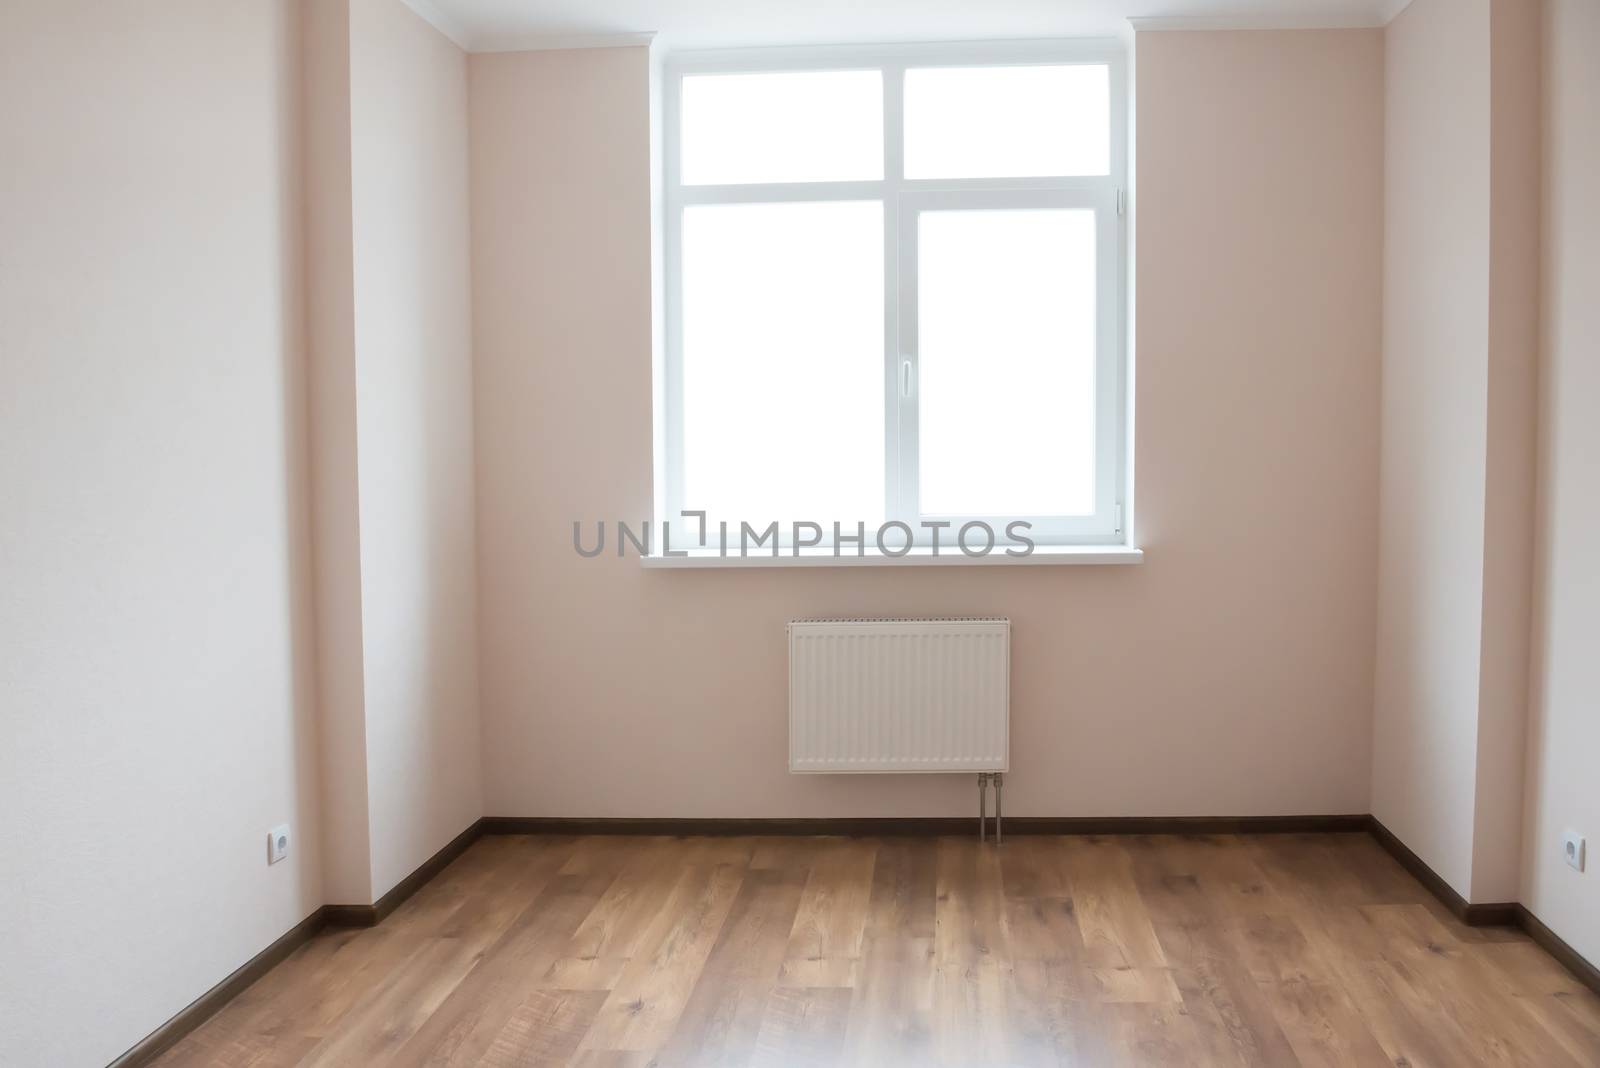 Empty room with window and wooden floor by vapi